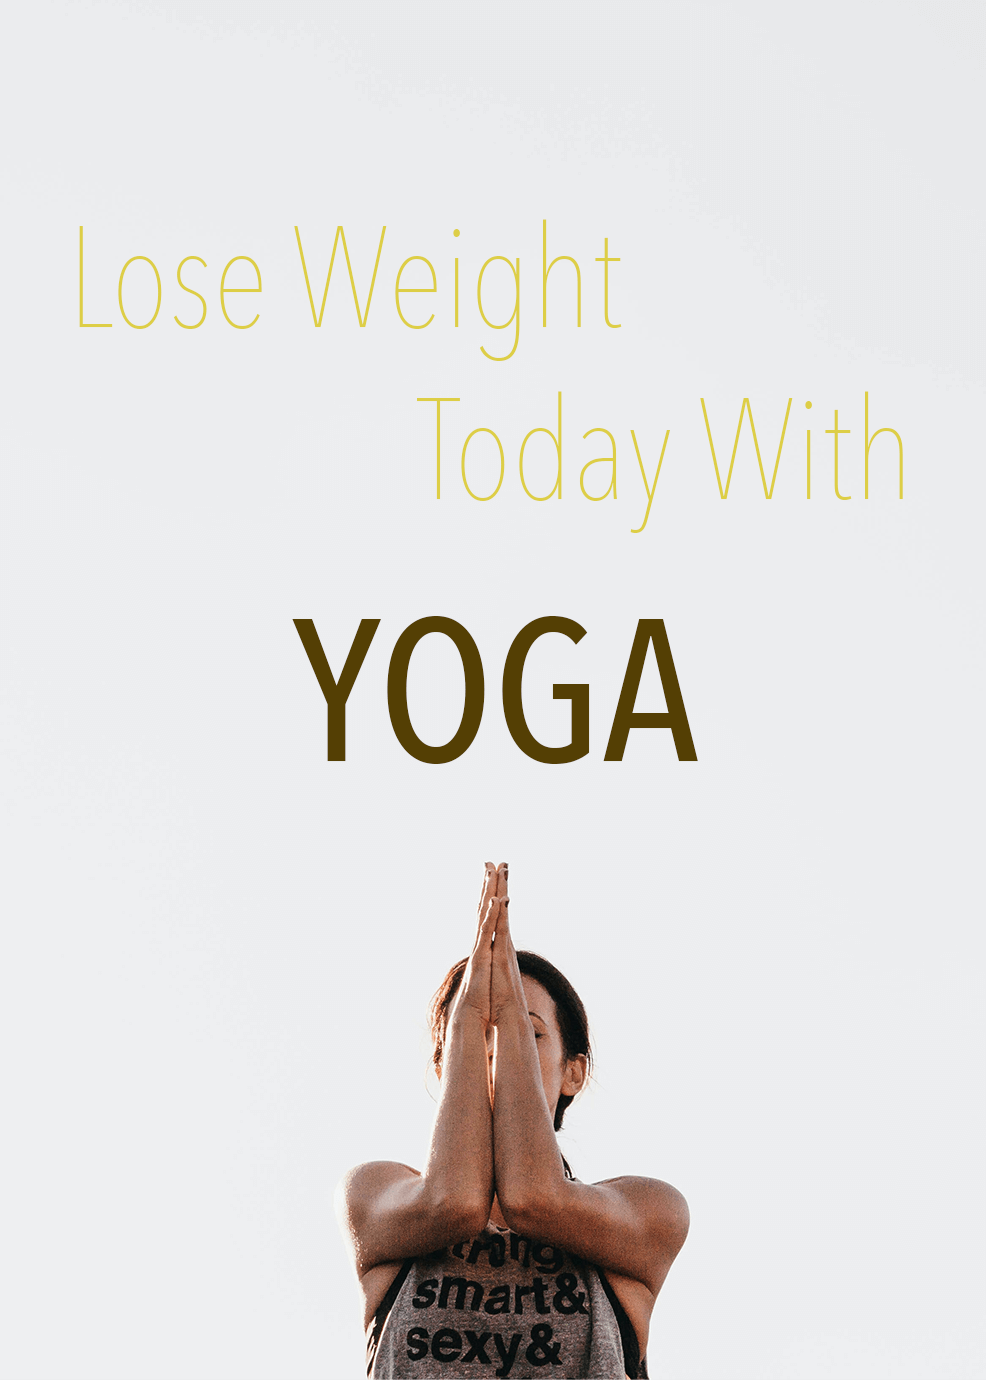 New Lose Weight Today With Yoga